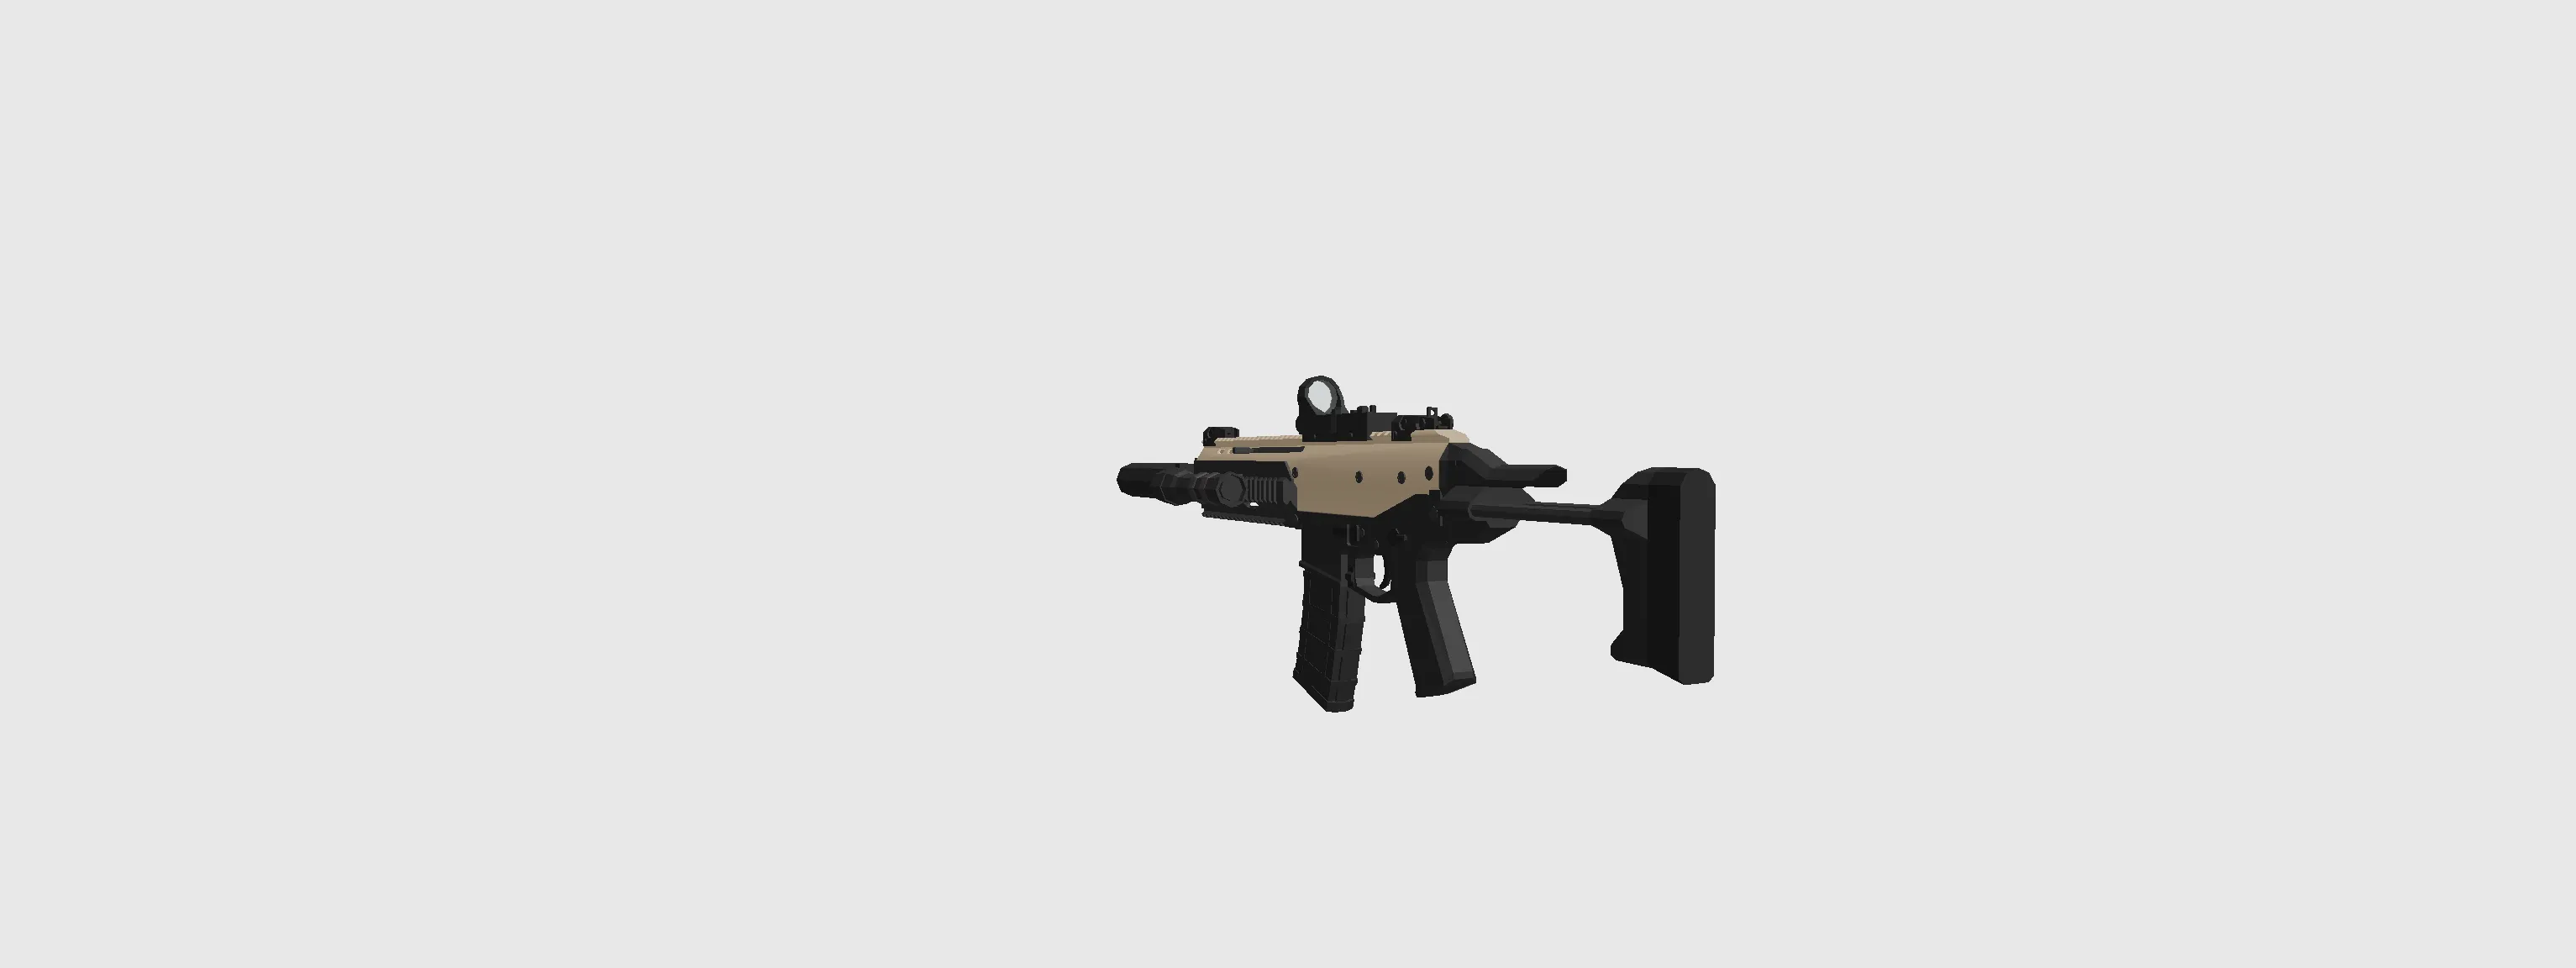 low poly acr pdw